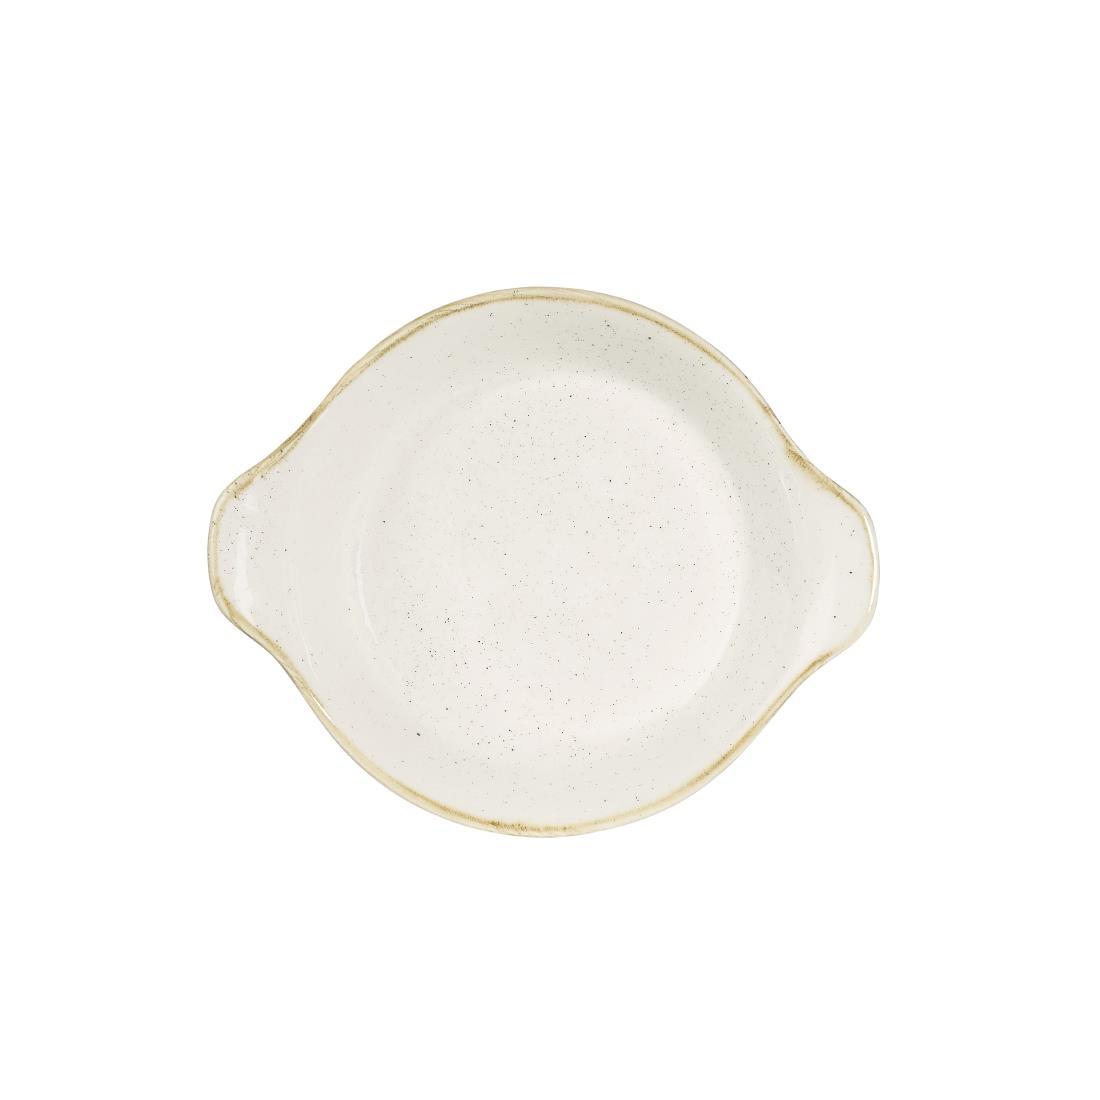 Churchill Stonecast Round Eared Dishes Barley White 180mm (Pack of 6) - DS493  - 2